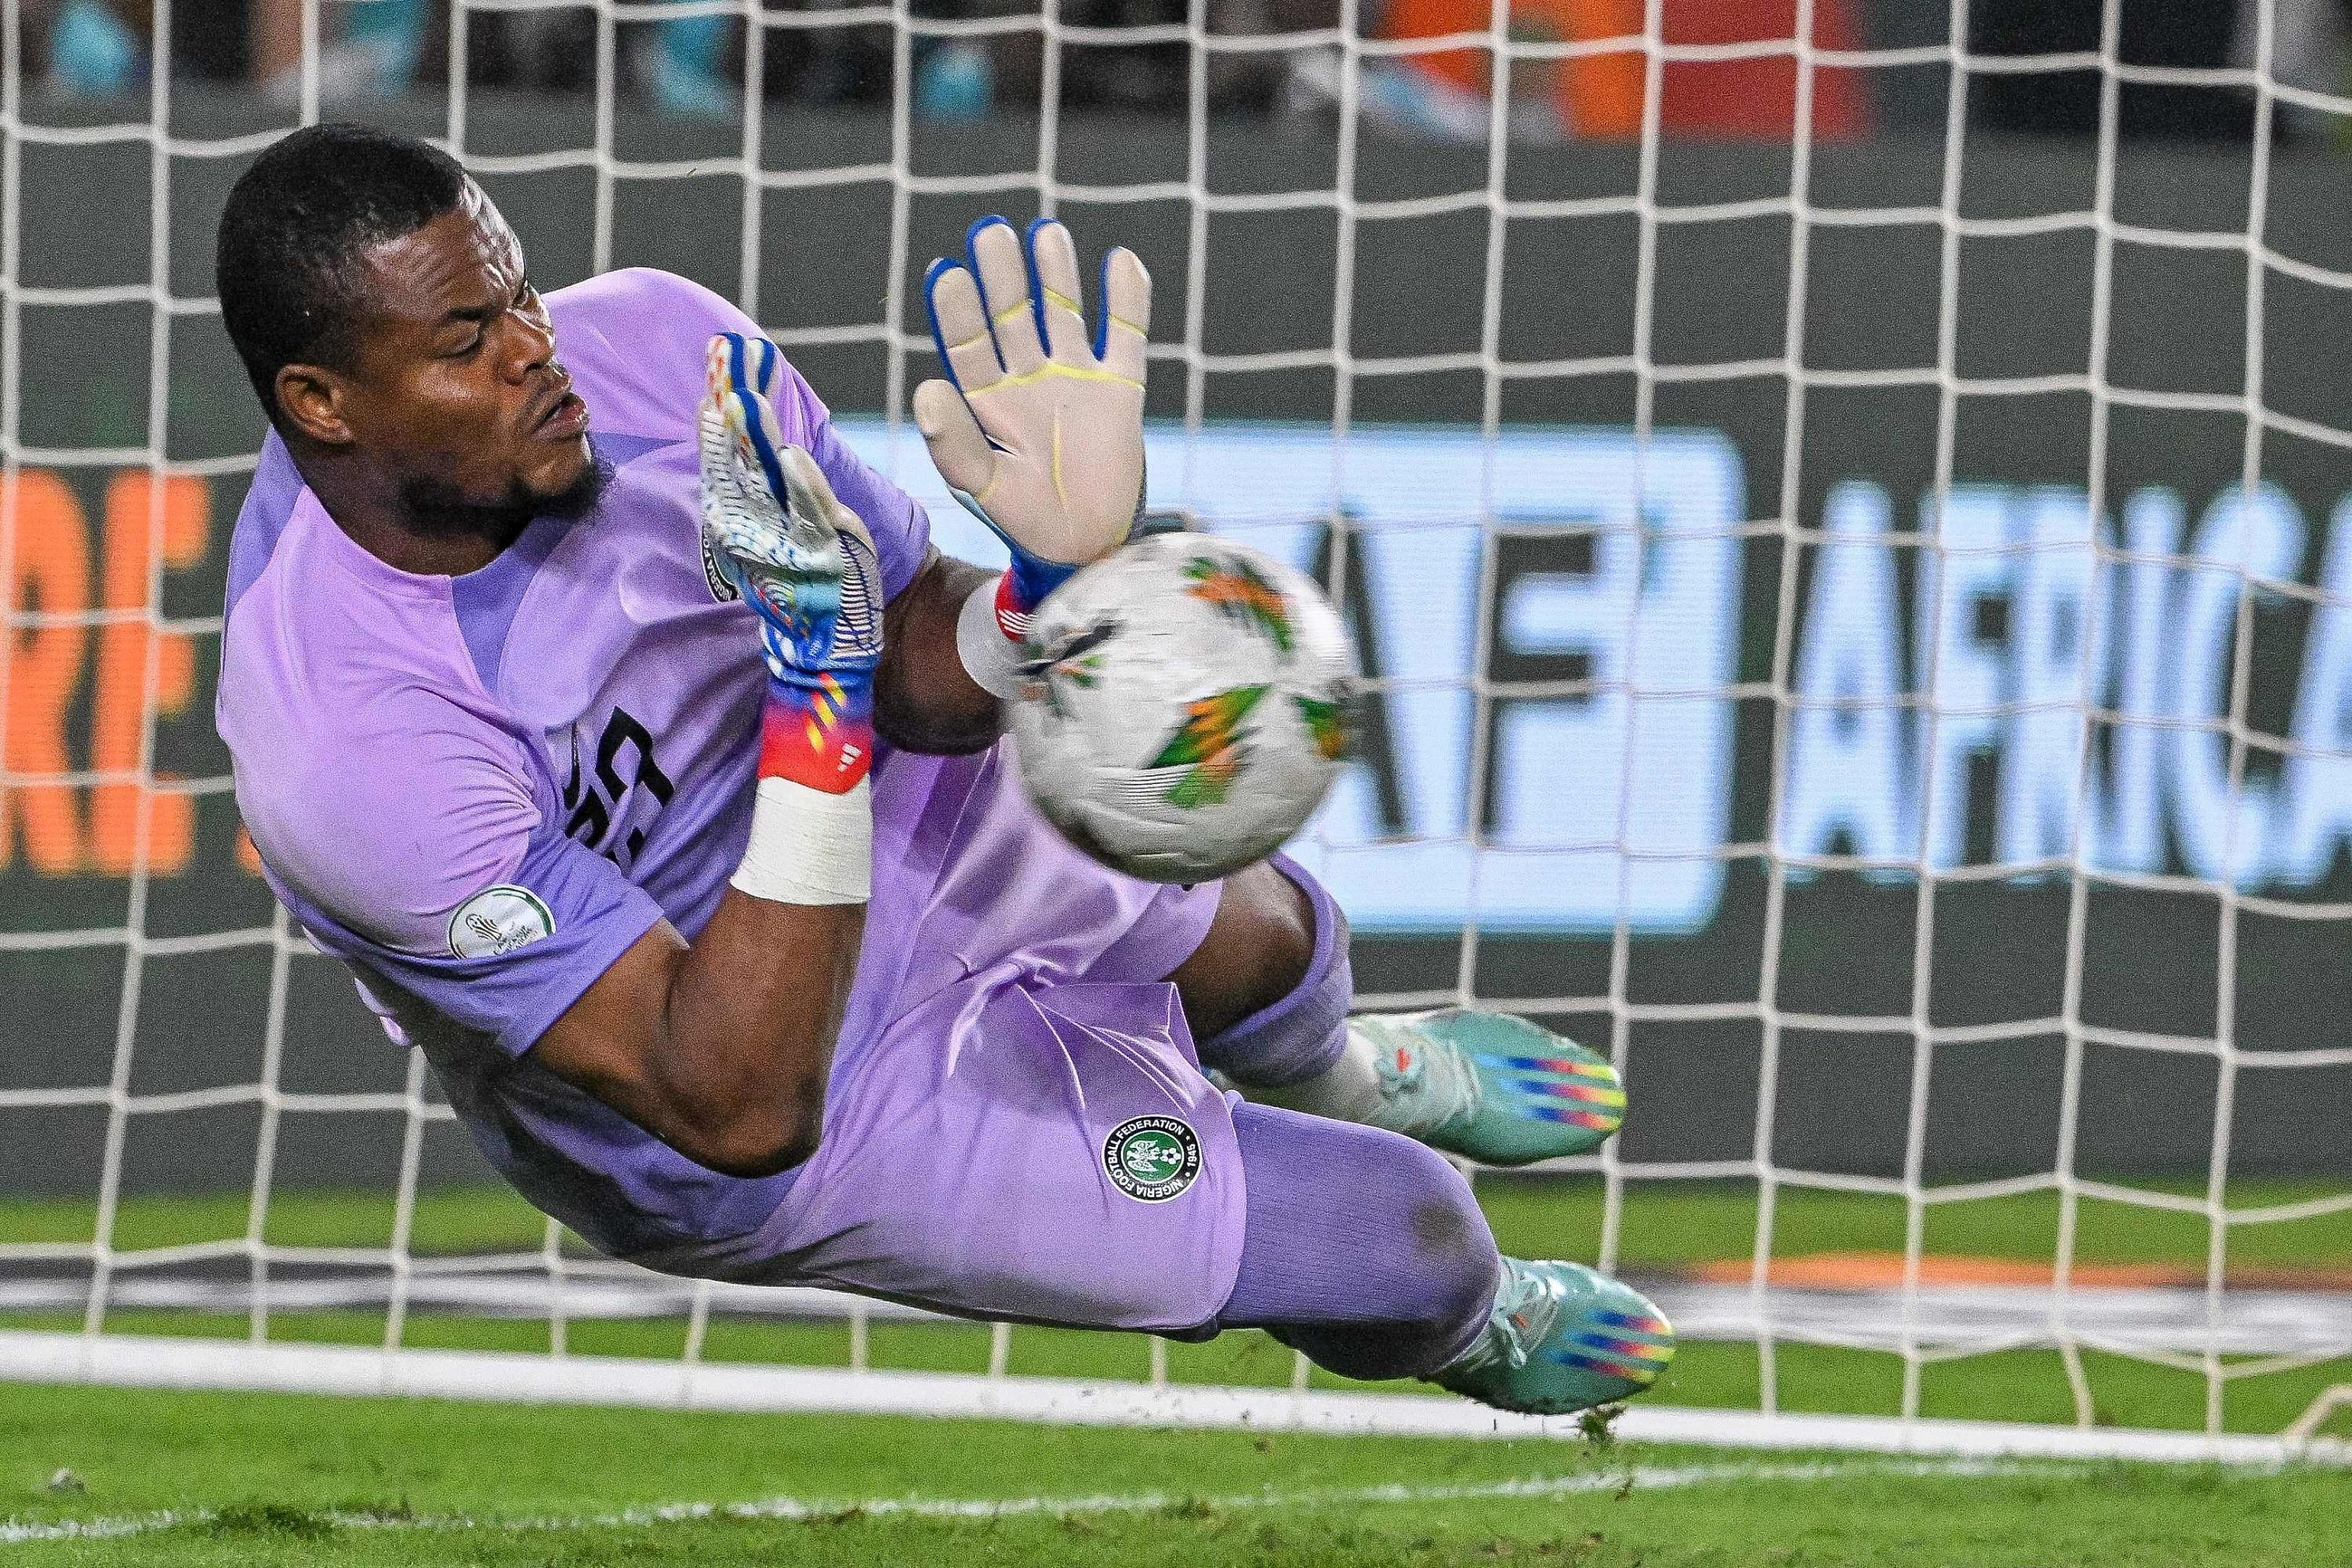 CAN: Nwabali, Nigeria’s goalkeeper at the top of a career strewn with pitfalls